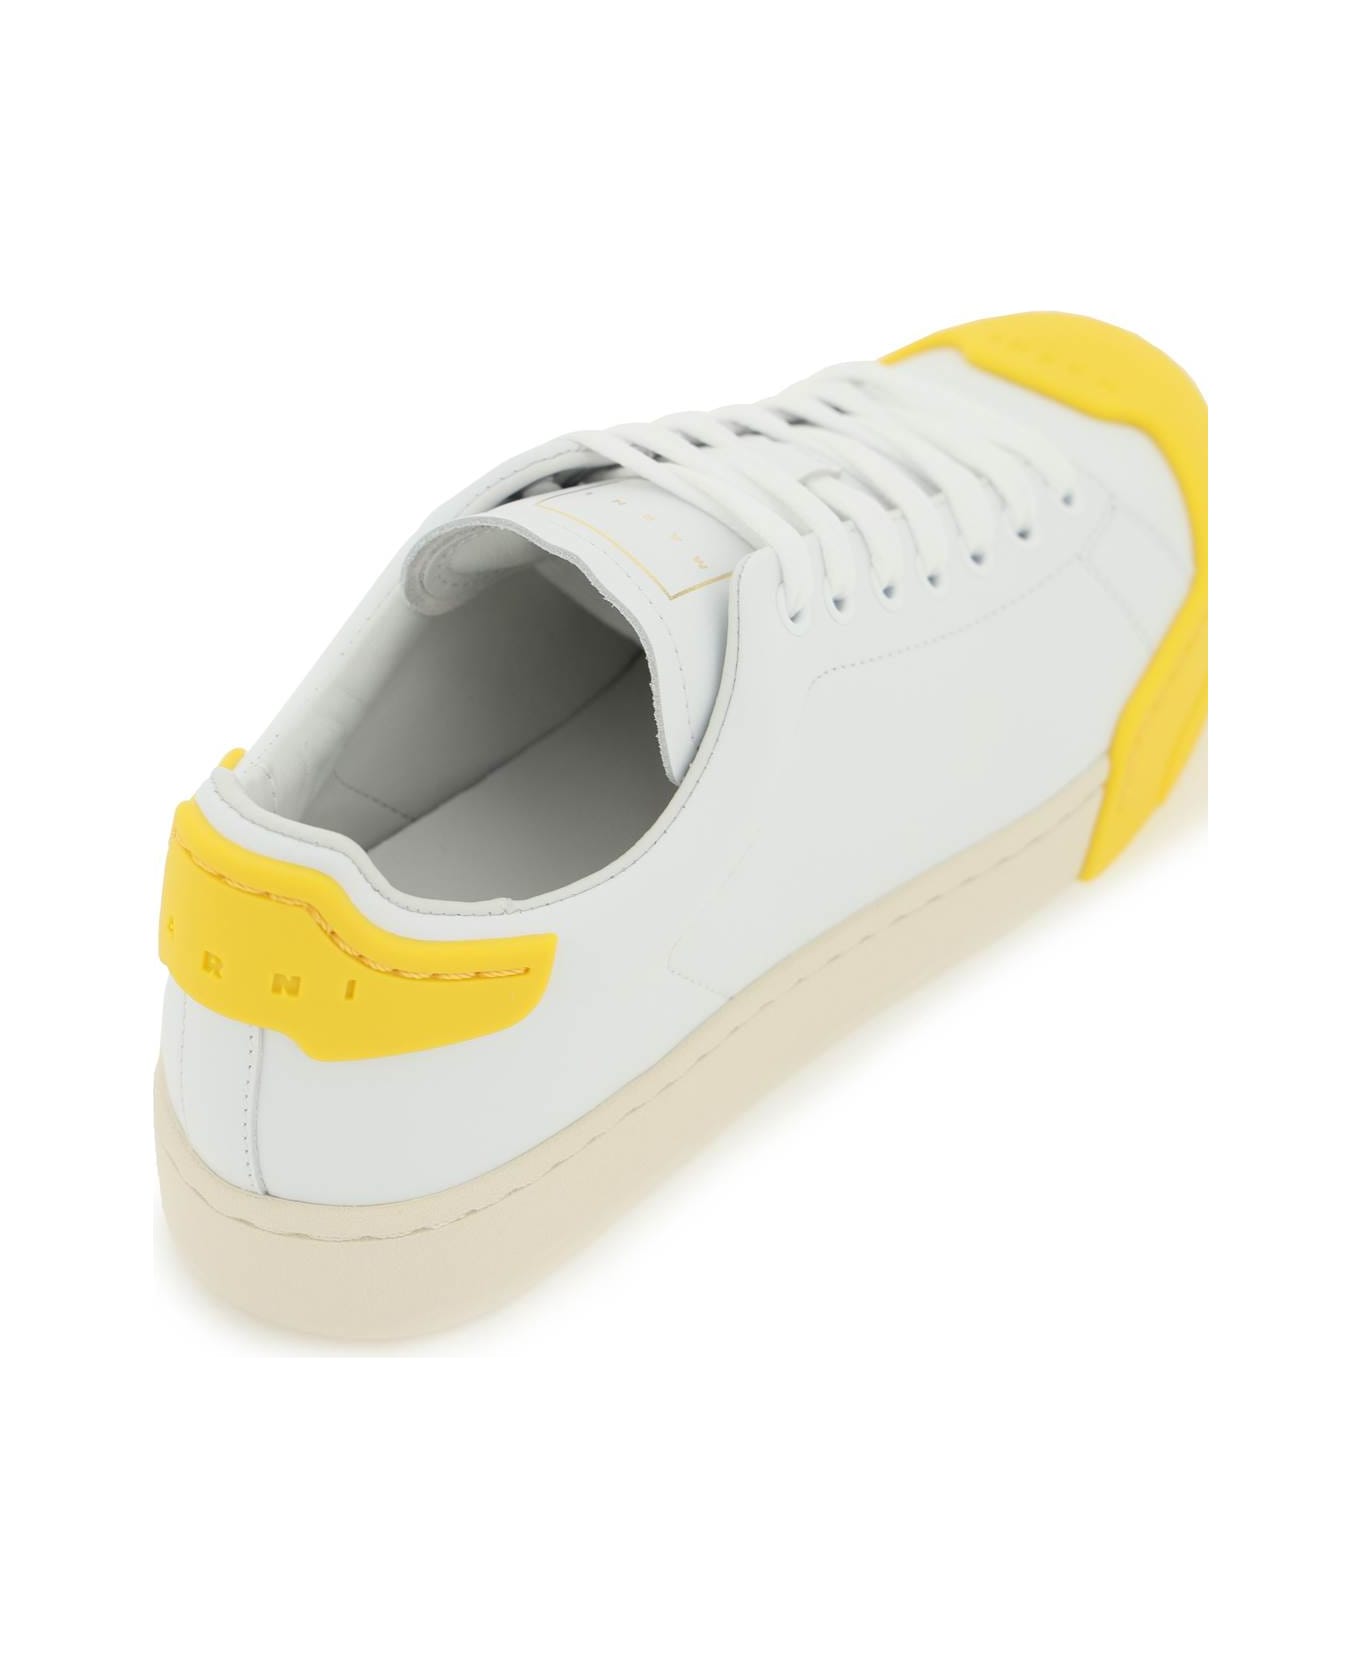 Marni Sneakers - LILY WHITE YELLOW (White) スニーカー